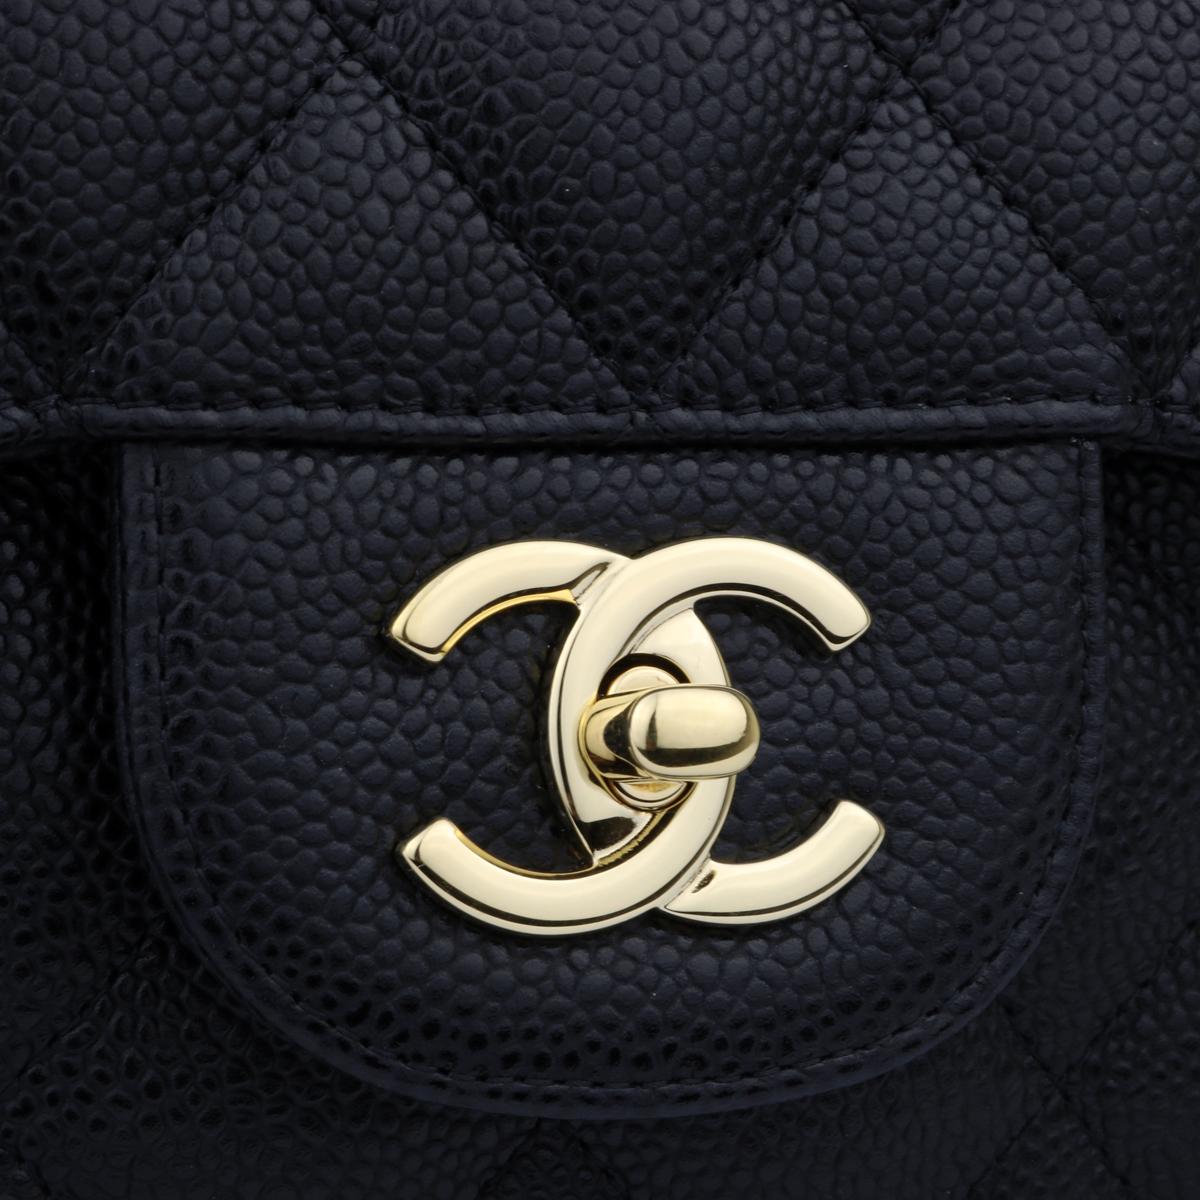 Authentic CHANEL Classic Jumbo Double Flap Black Caviar with Gold Hardware 2014.

This stunning bag is in mint condition, the bag still holds its original shape, and the hardware is still very shiny. Leather smells fresh as if new.

Exterior